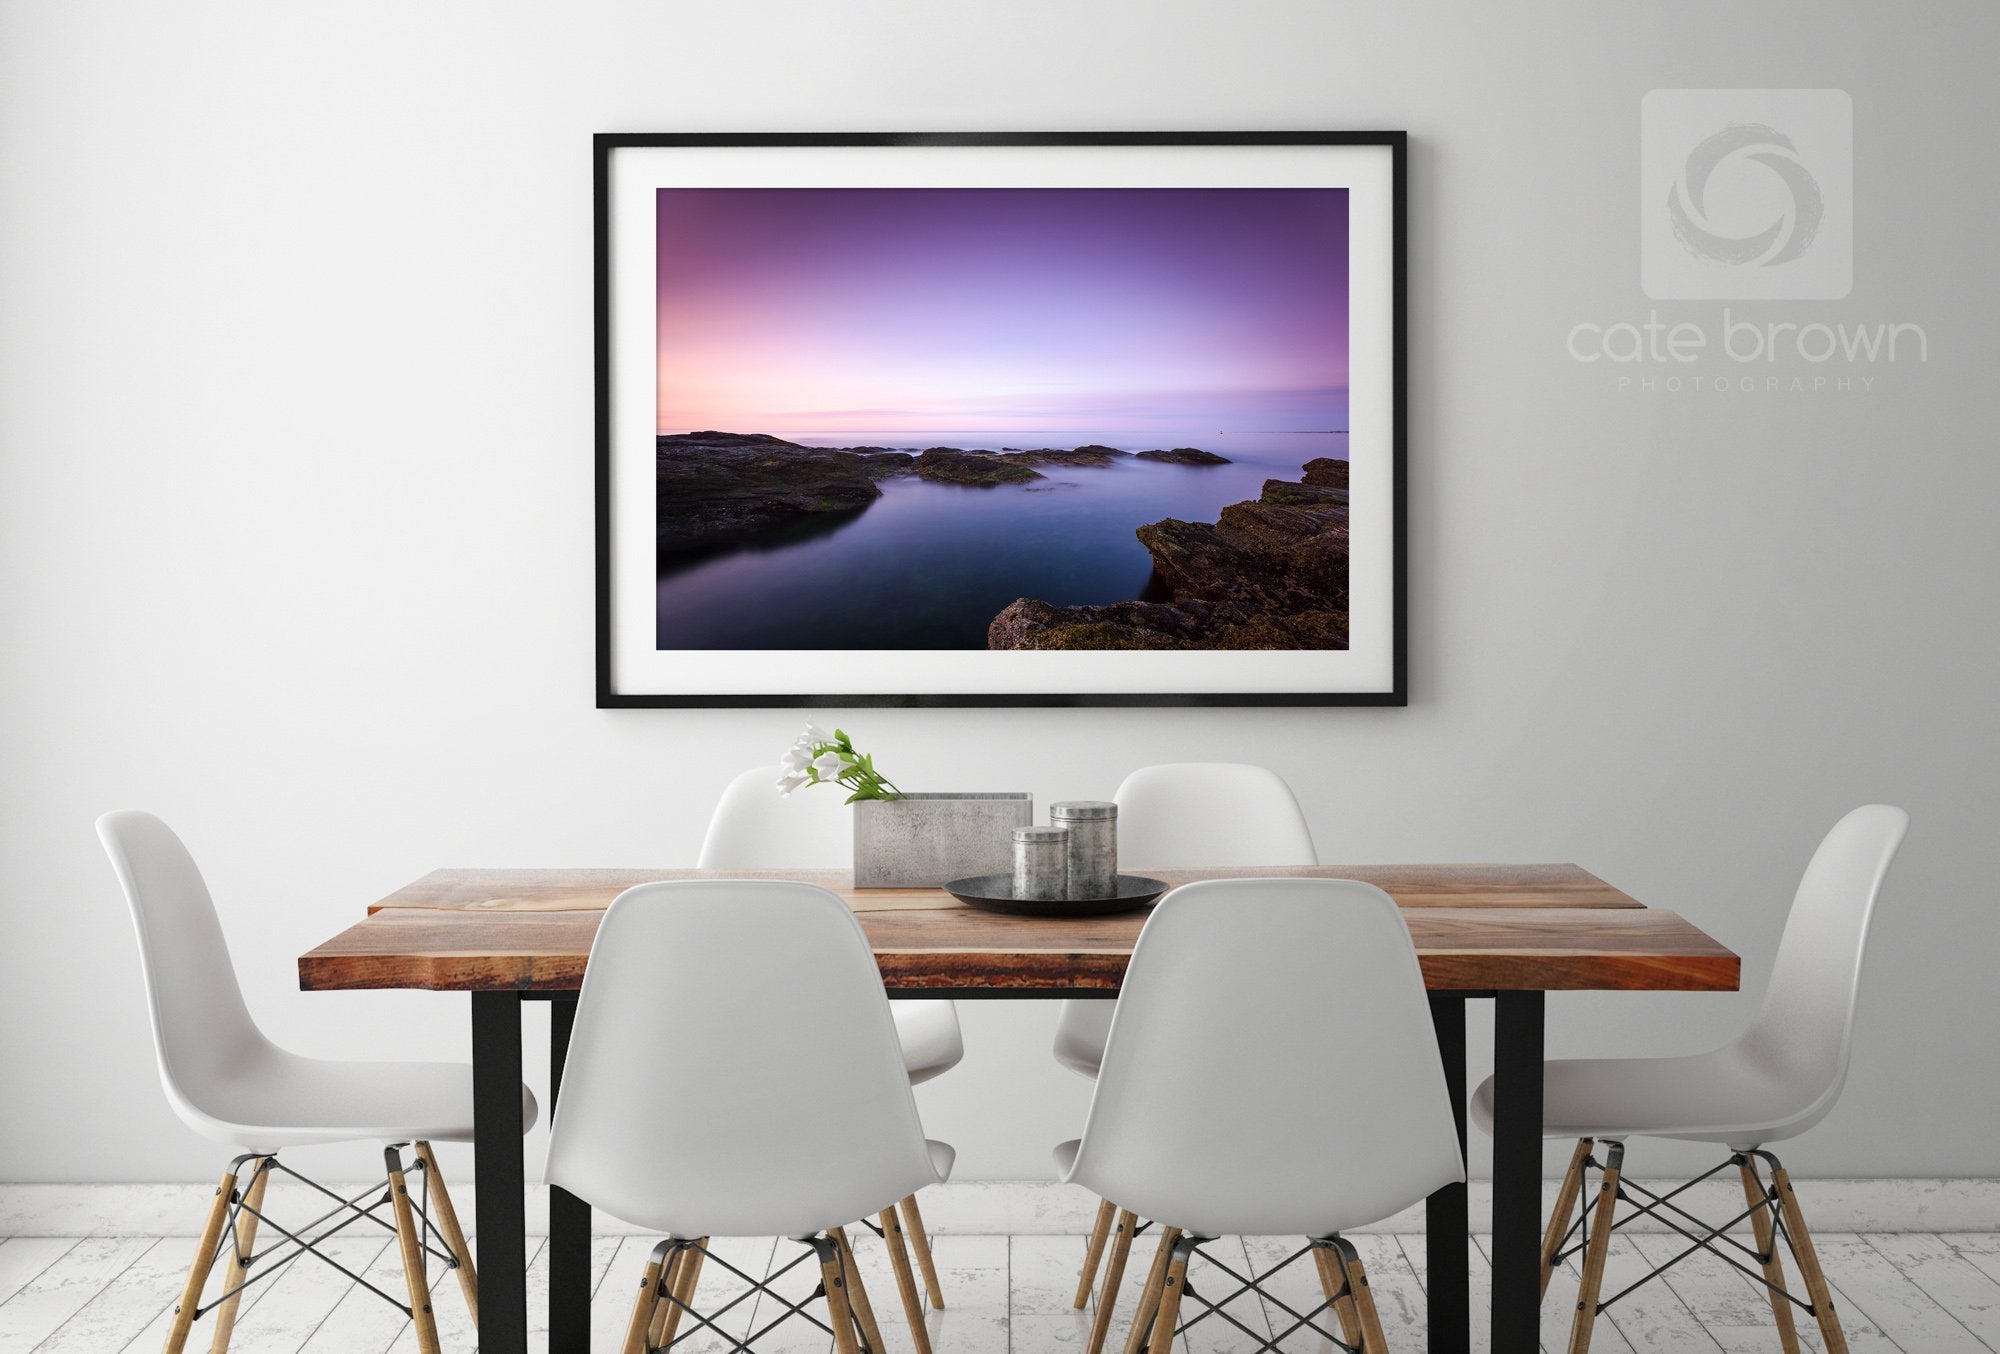 Cate Brown Photo Beavertail at Sunrise  //  Seascape Photography Made to Order Ocean Fine Art